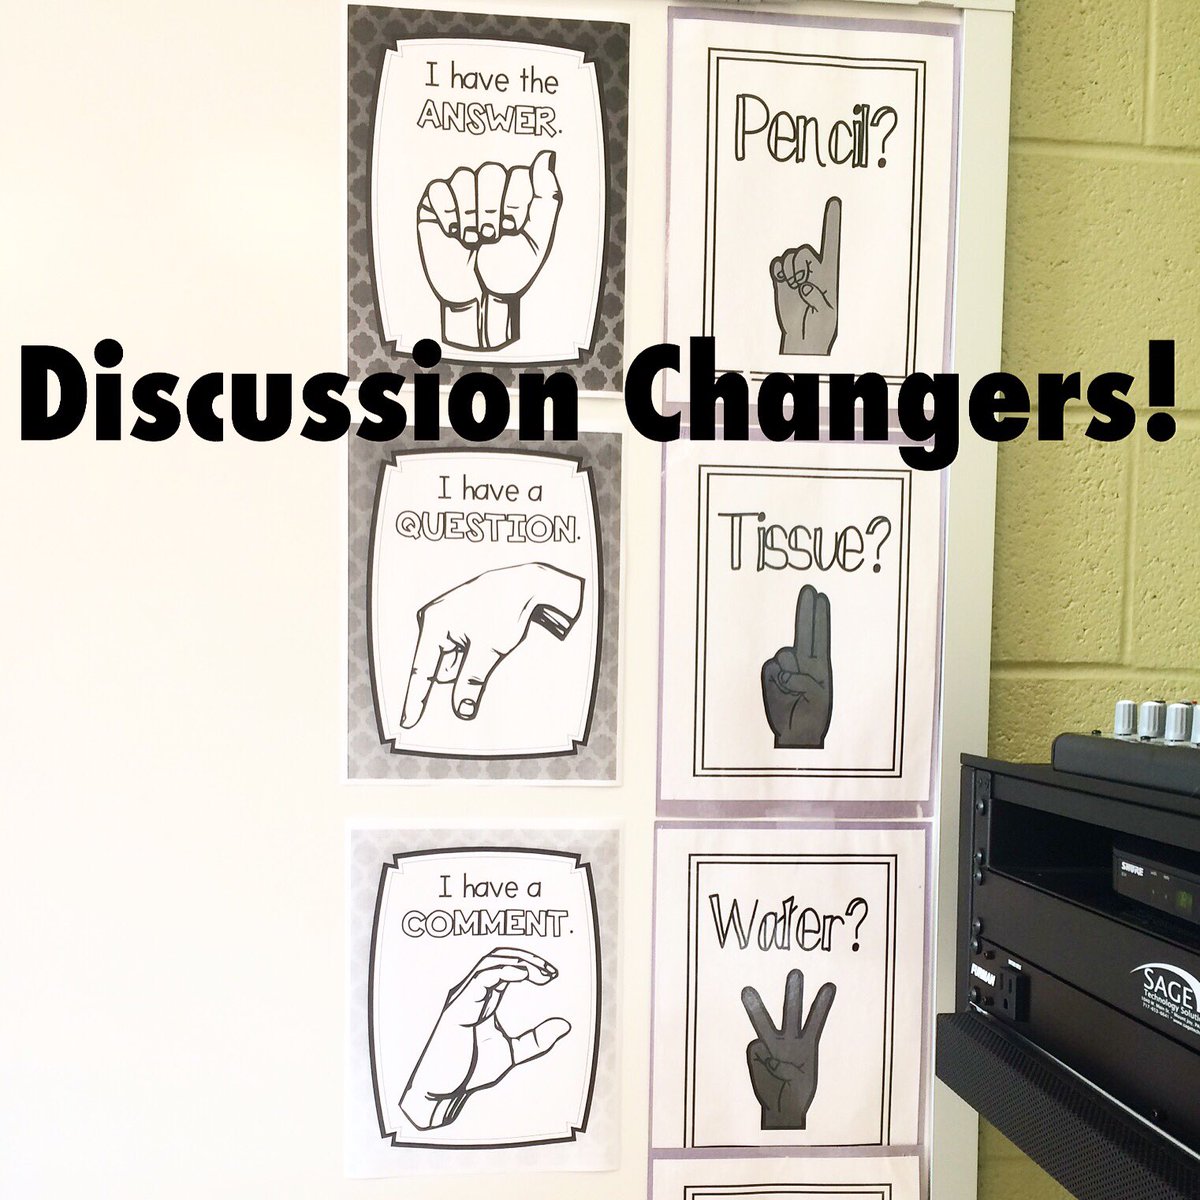 Thoughtful and deeper conversations thanks to our discussion changers! #handsymbols #classroomroutine #engagement